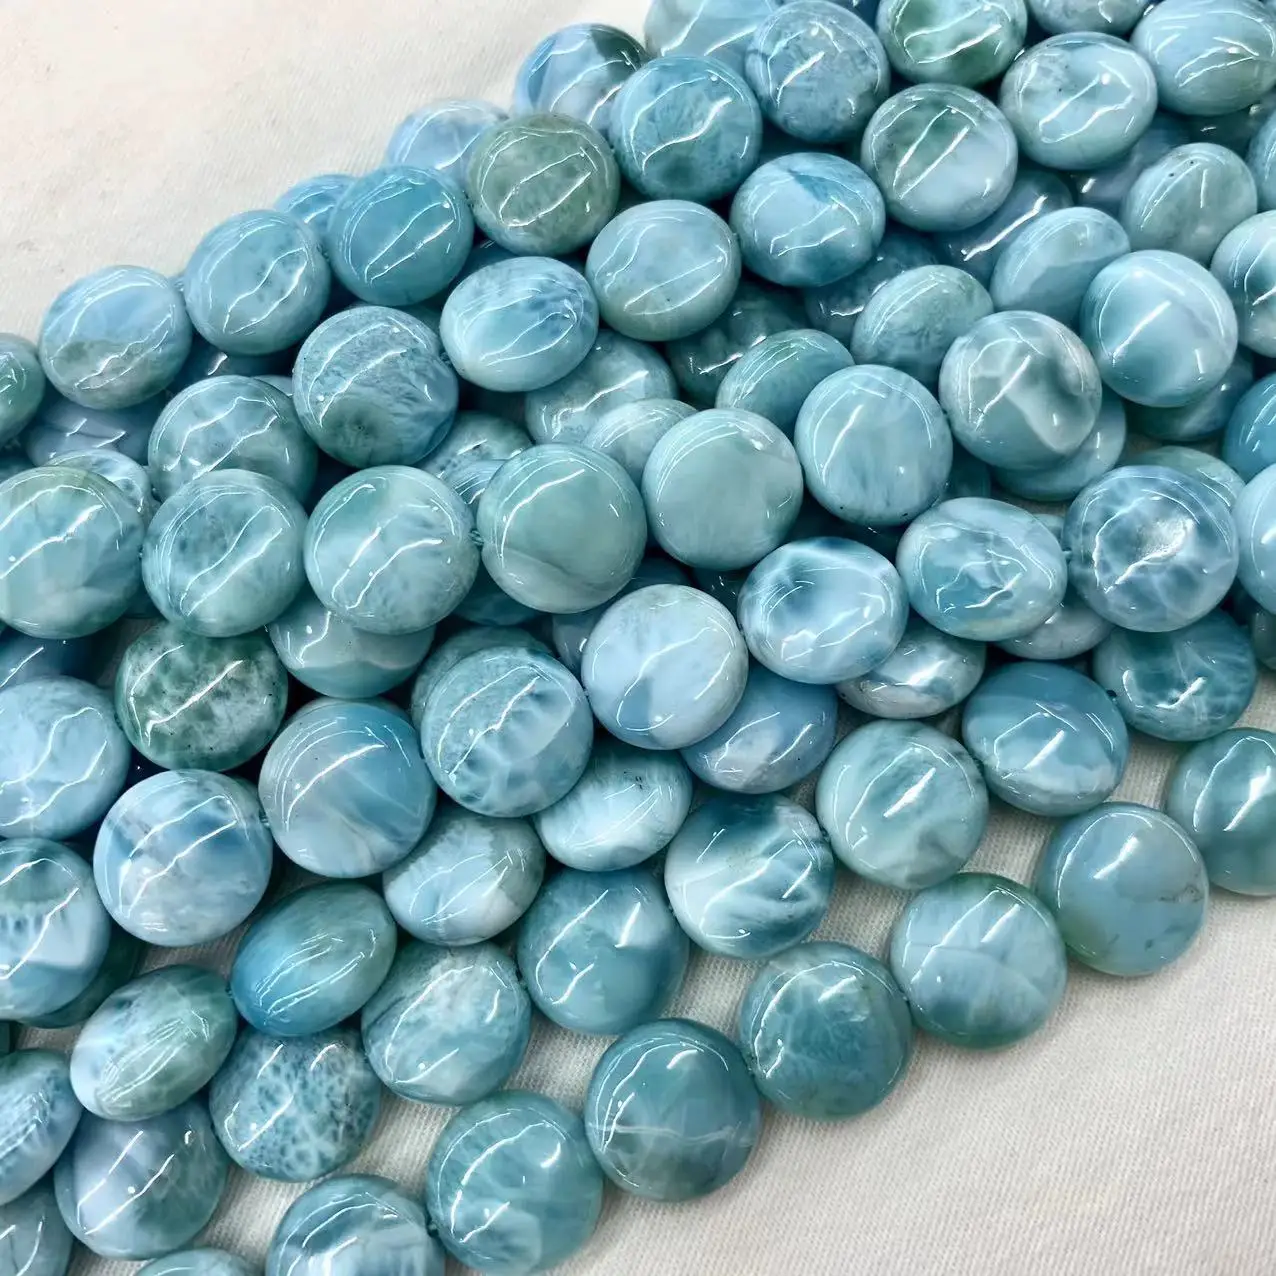 

12mm Coin Dominica Larimar/Copper Pectolite Stone Natural Gemstone DIY Loose Beads For Jewelry Making Strand 15" Wholesale